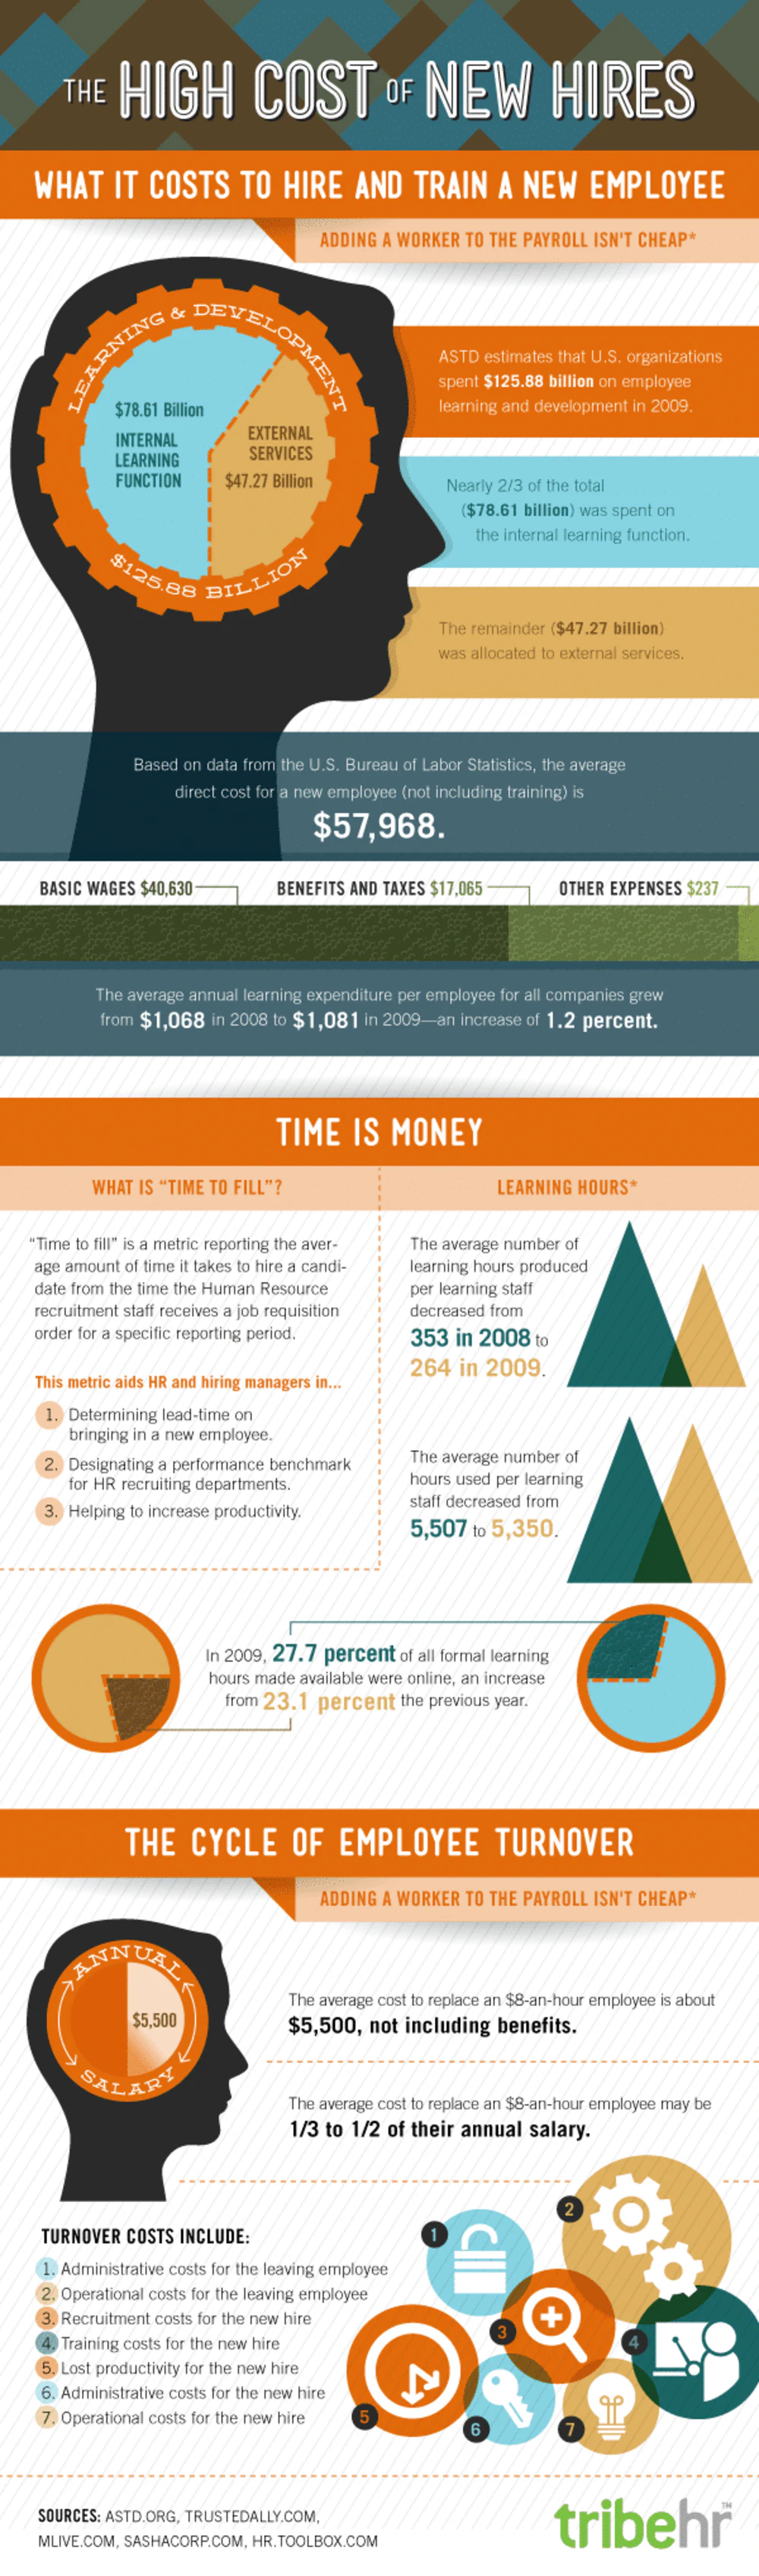 The High Cost of New Hires infographic